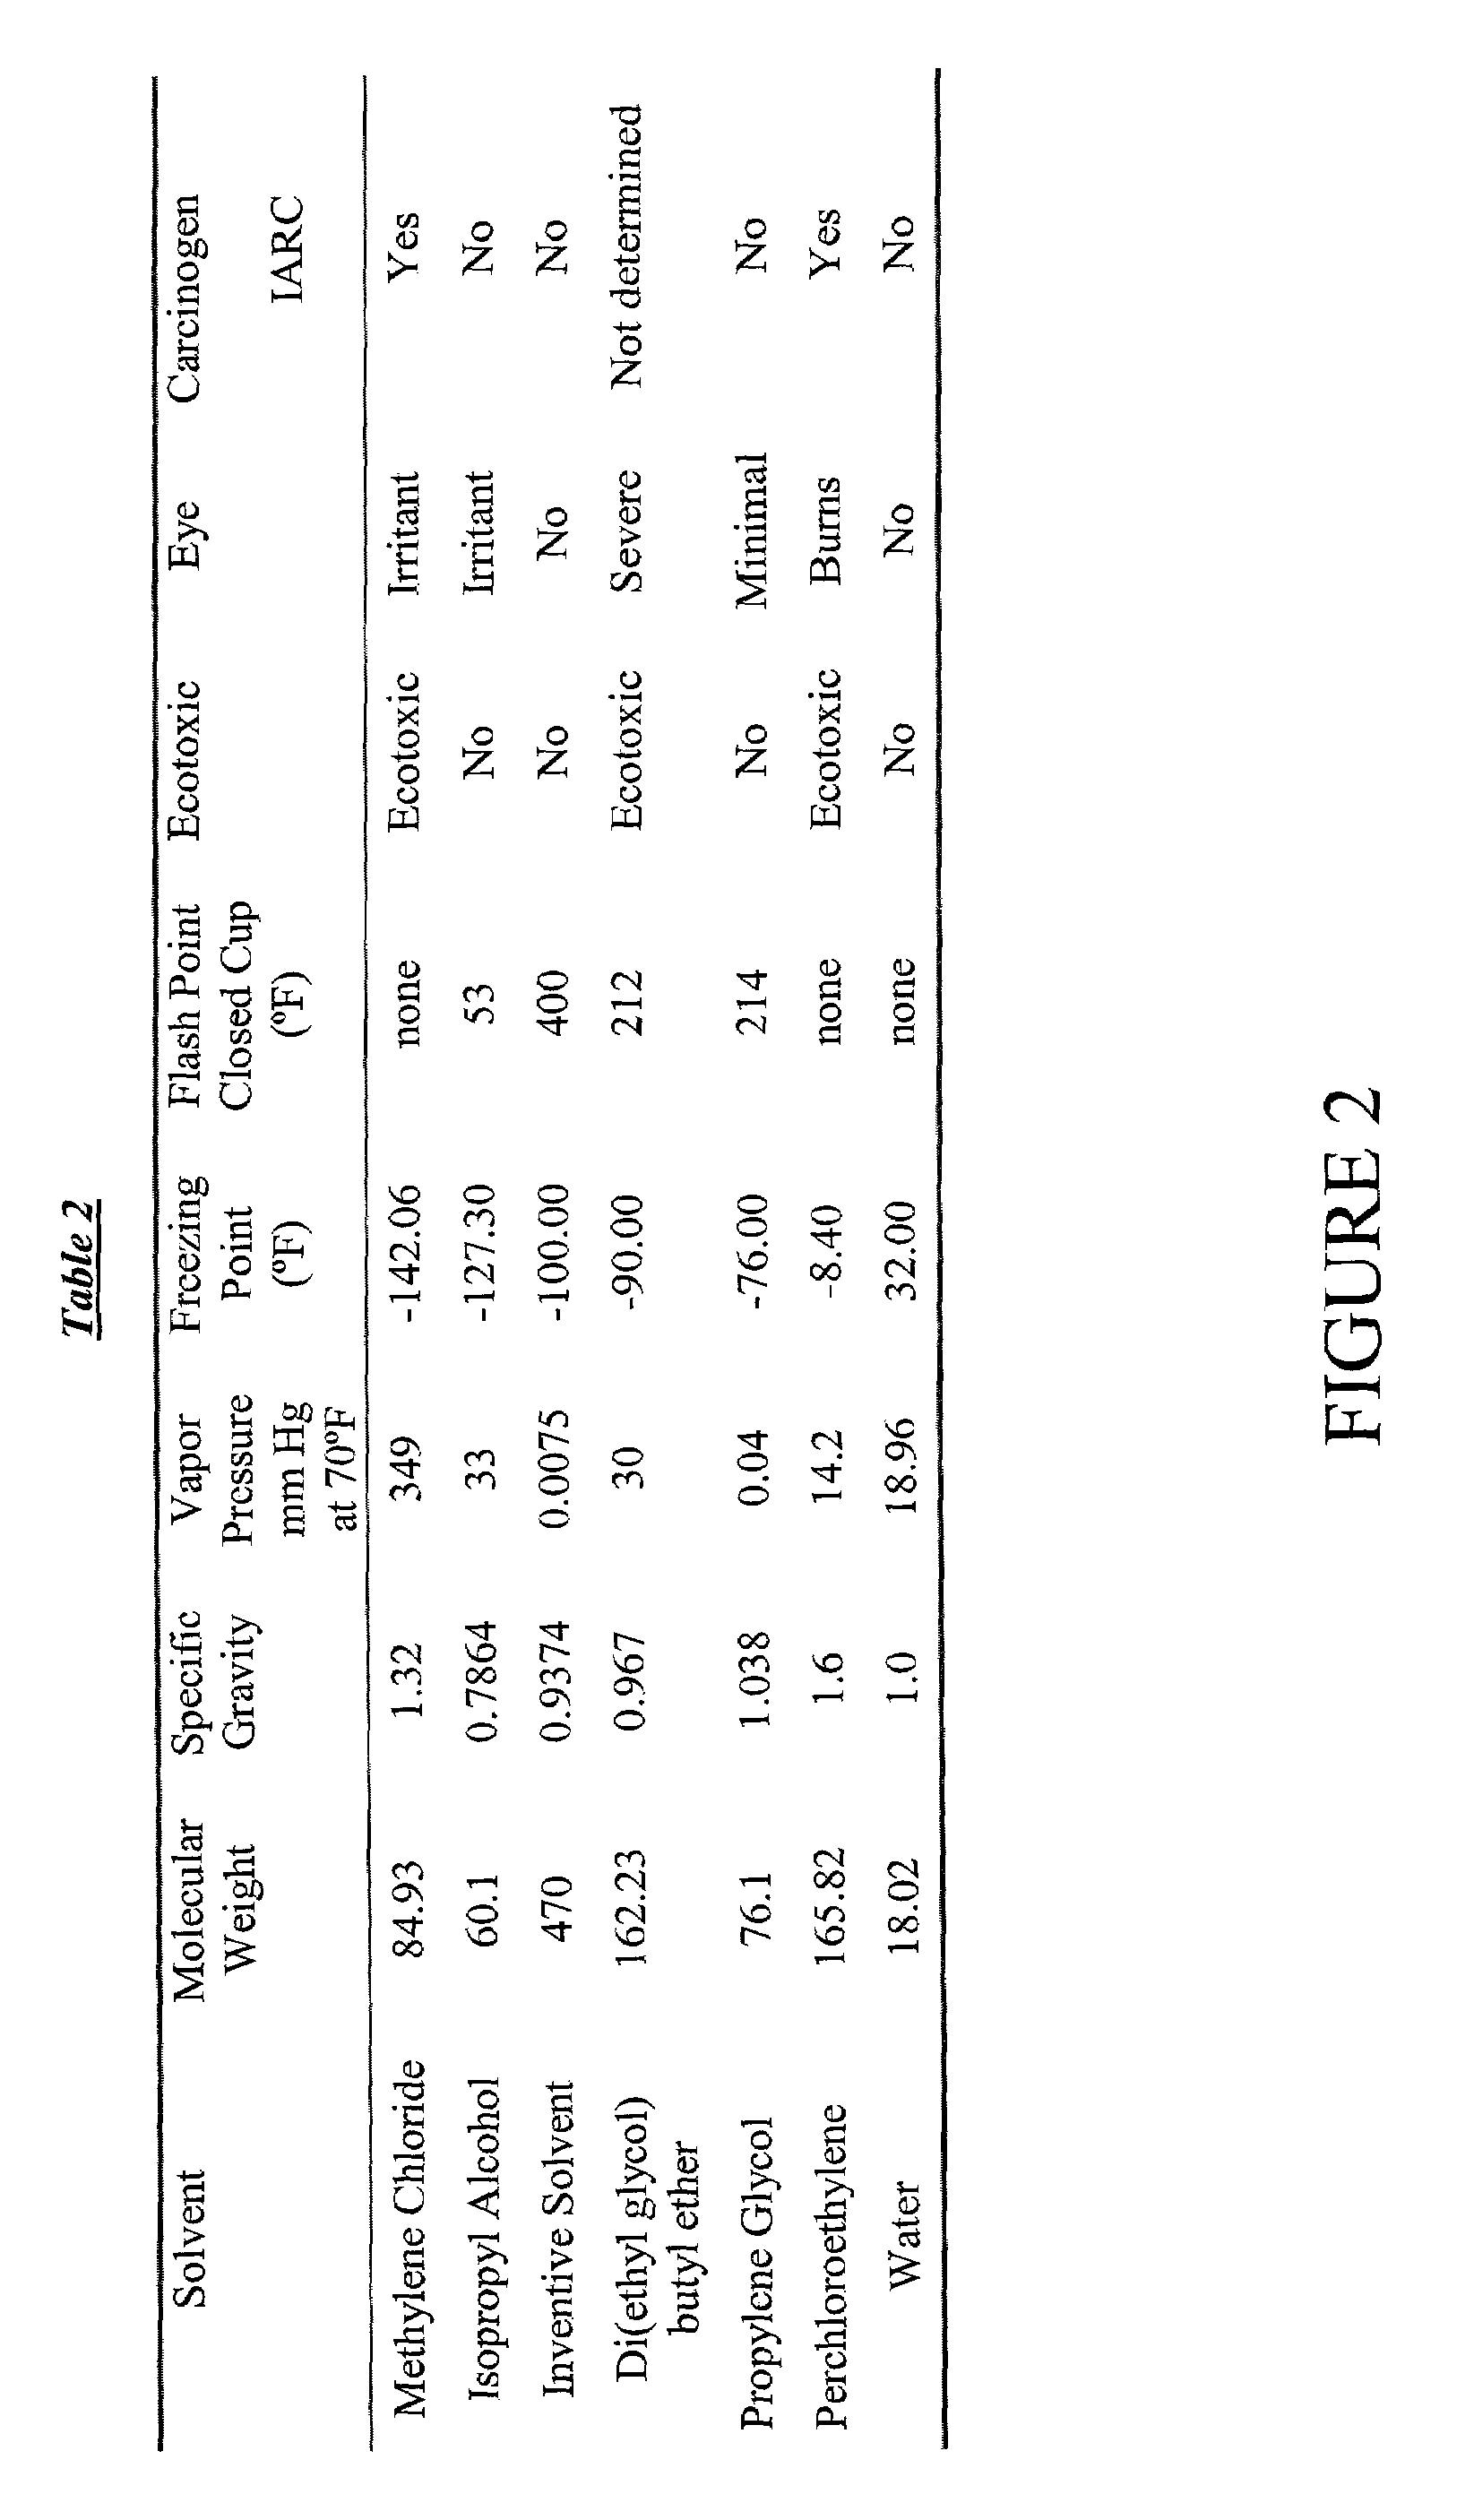 Non-lethal temporary incapacitation formulation and novel solvent system